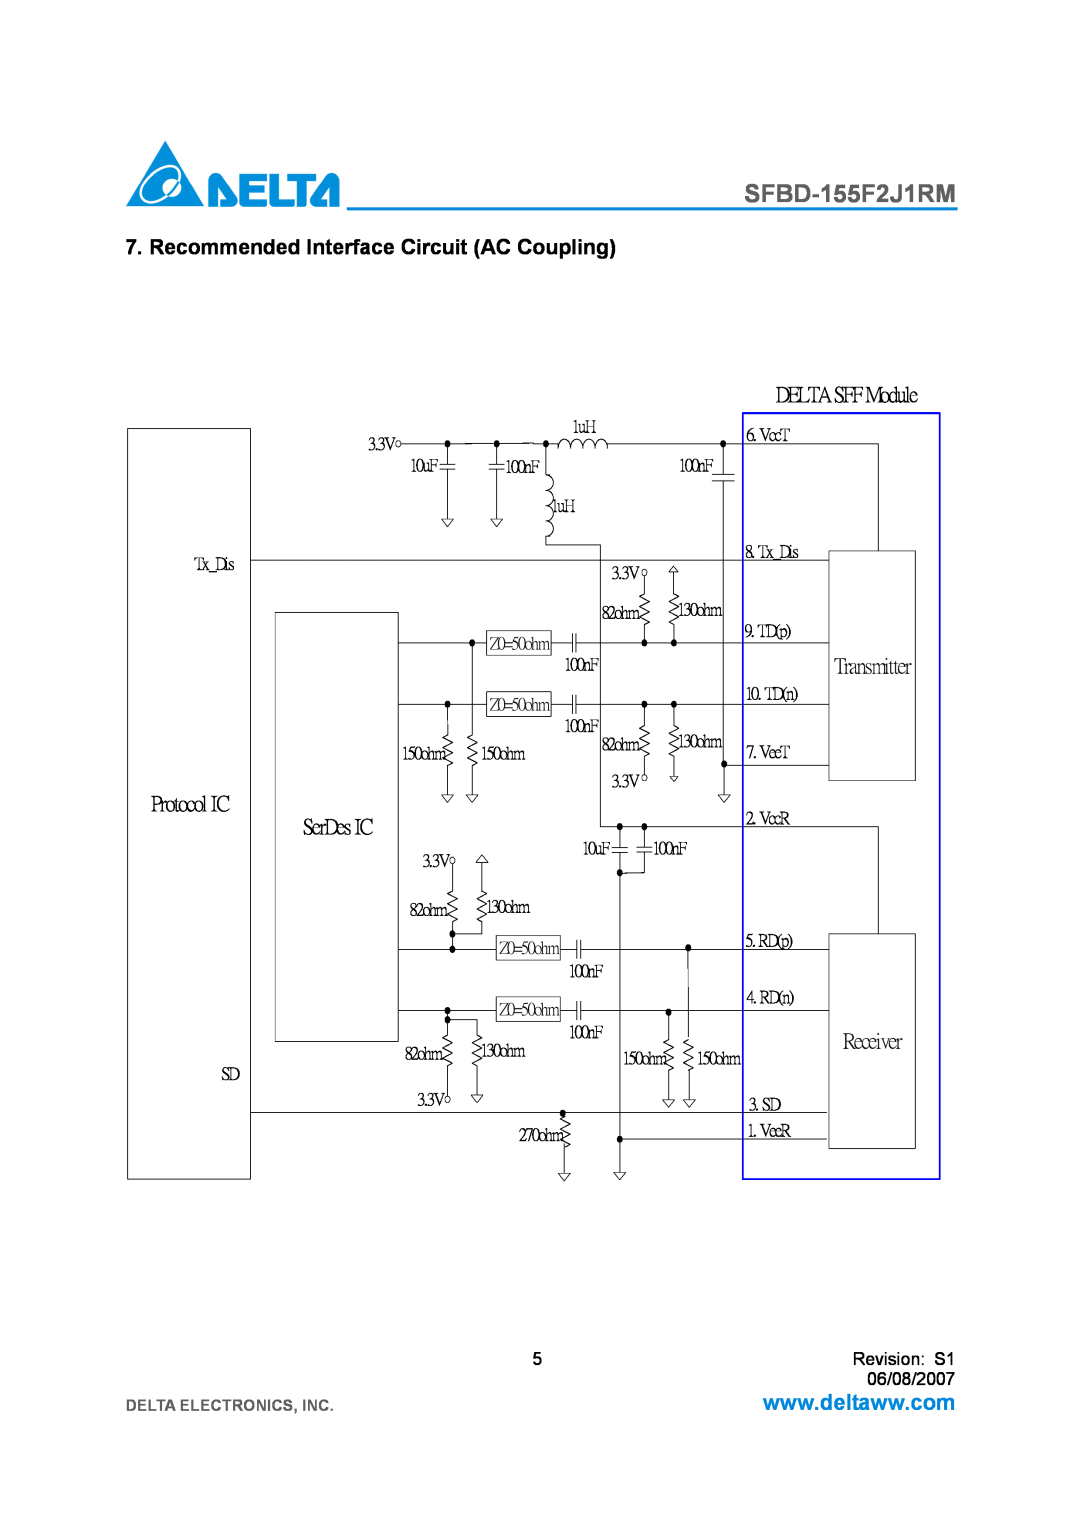 Delta Electronics SFBD-155F2J1RM Recommended Interface Circuit AC Coupling, Transmitter, Protocol IC, SerDes IC, Receiver 